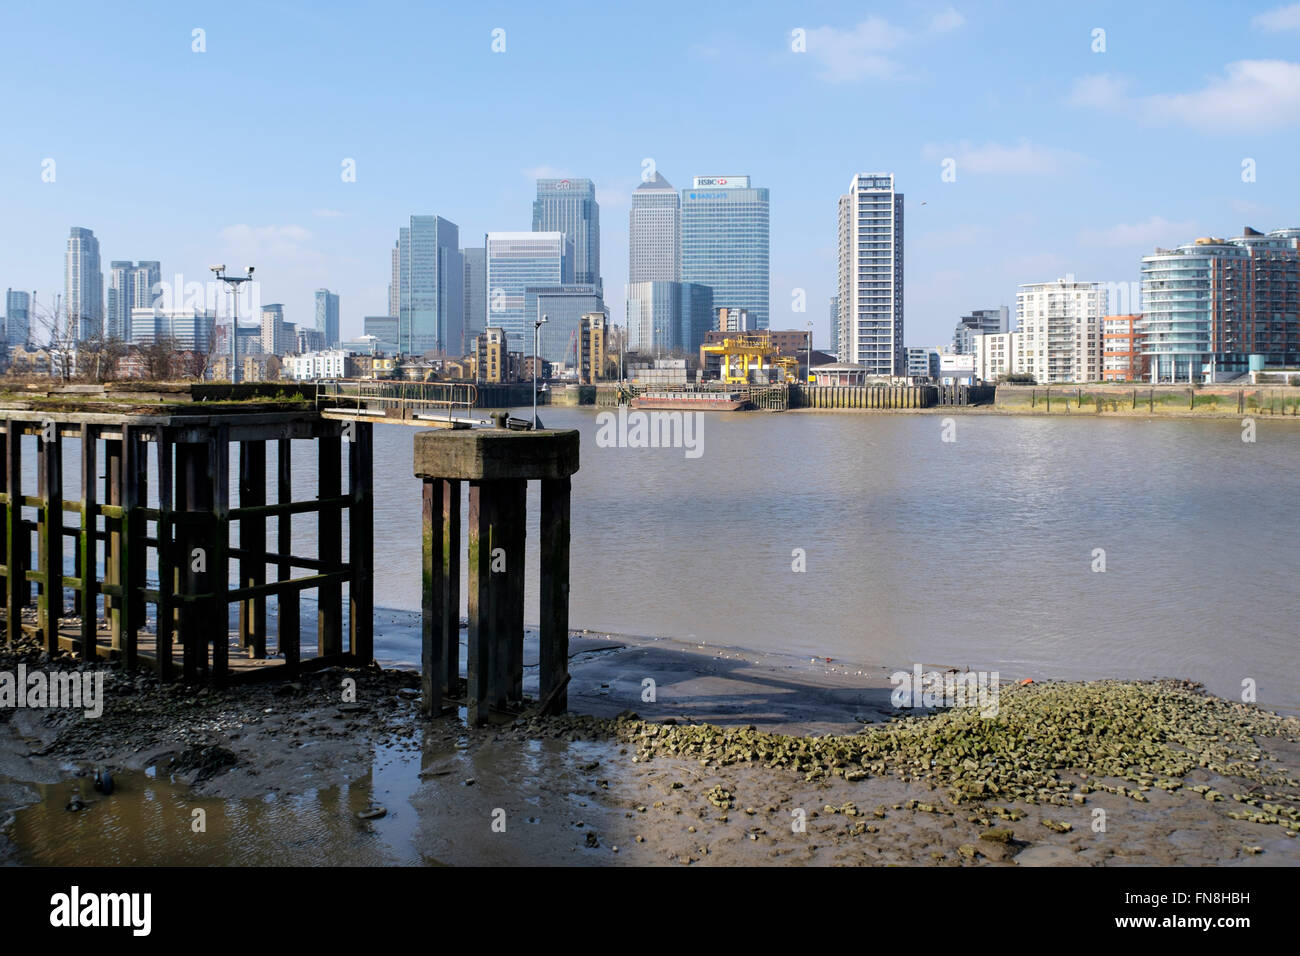 Canary wharf and docklands residential developments from the Thames path, Greenwich Peninsula, London, England, UK Stock Photo